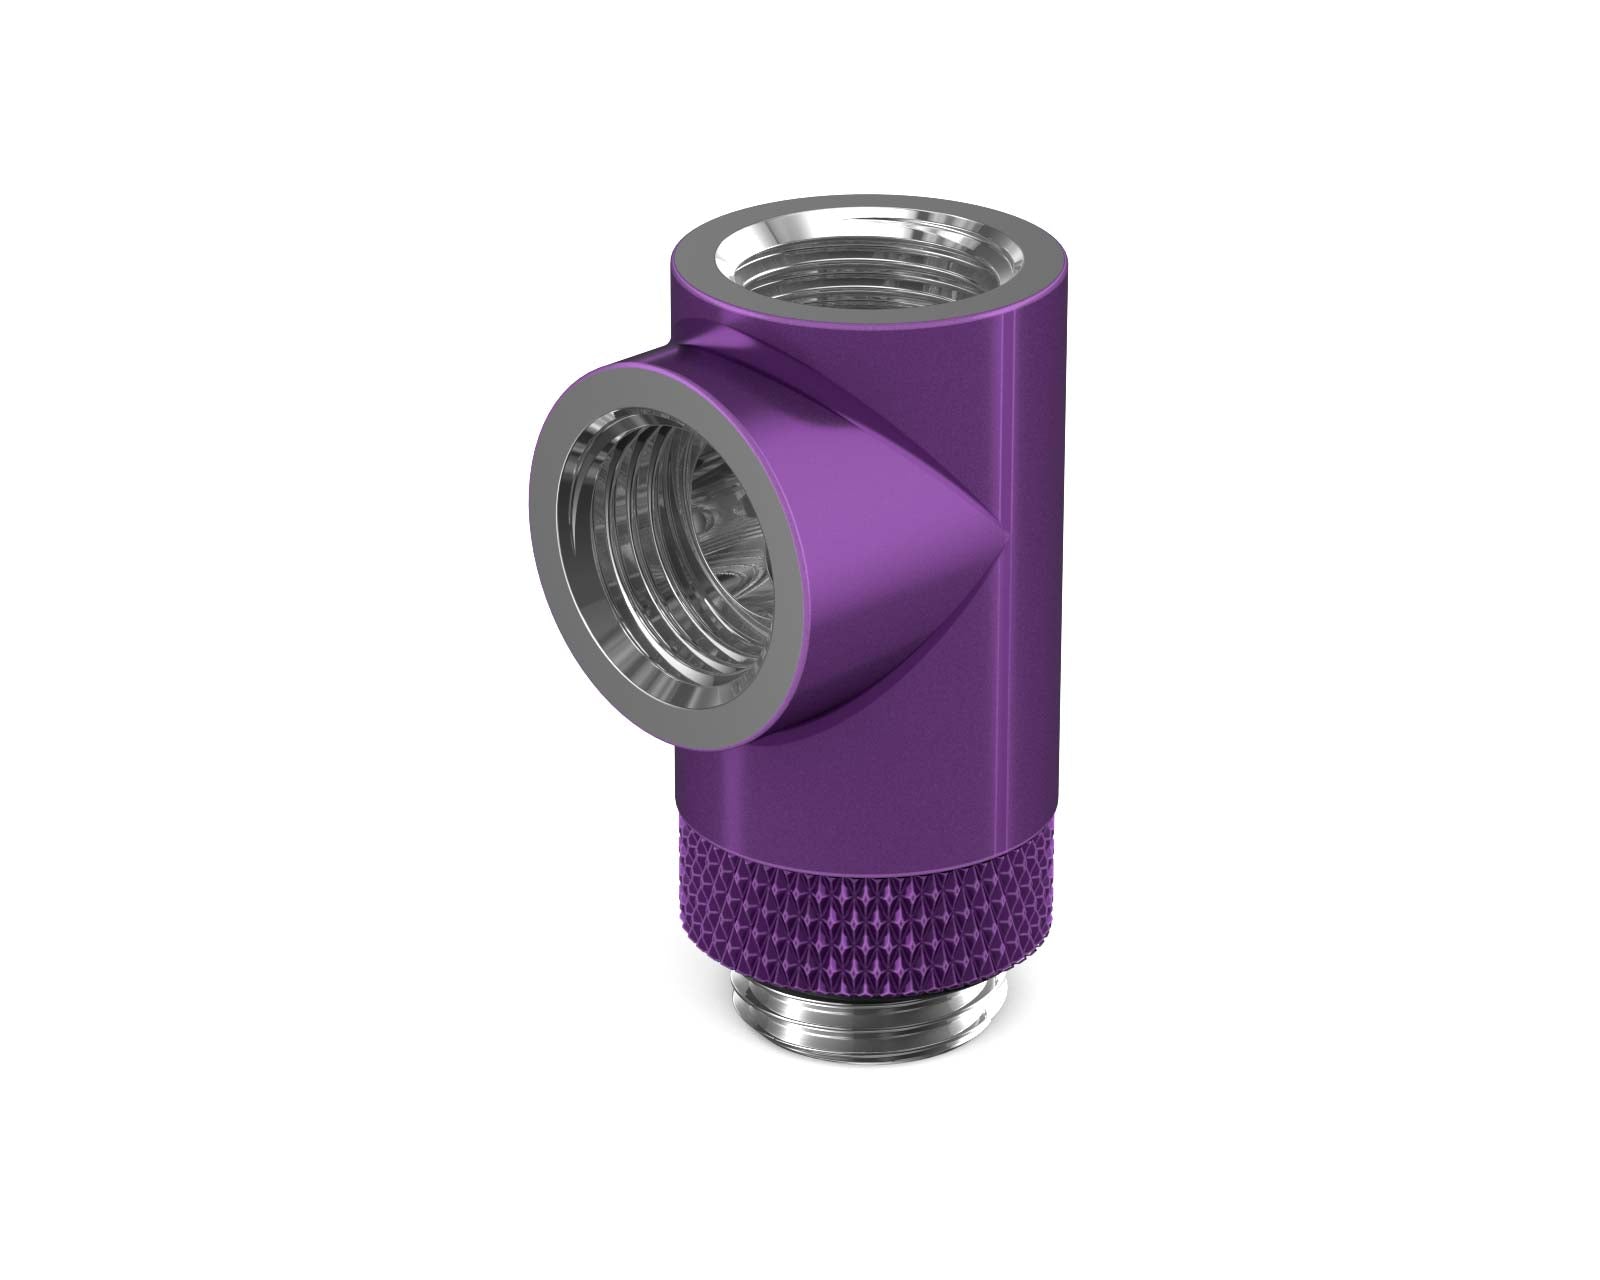 BSTOCK:PrimoChill G 1/4in. Inline Rotary 3-Way SX Female T Adapter - Candy Purple - PrimoChill - KEEPING IT COOL